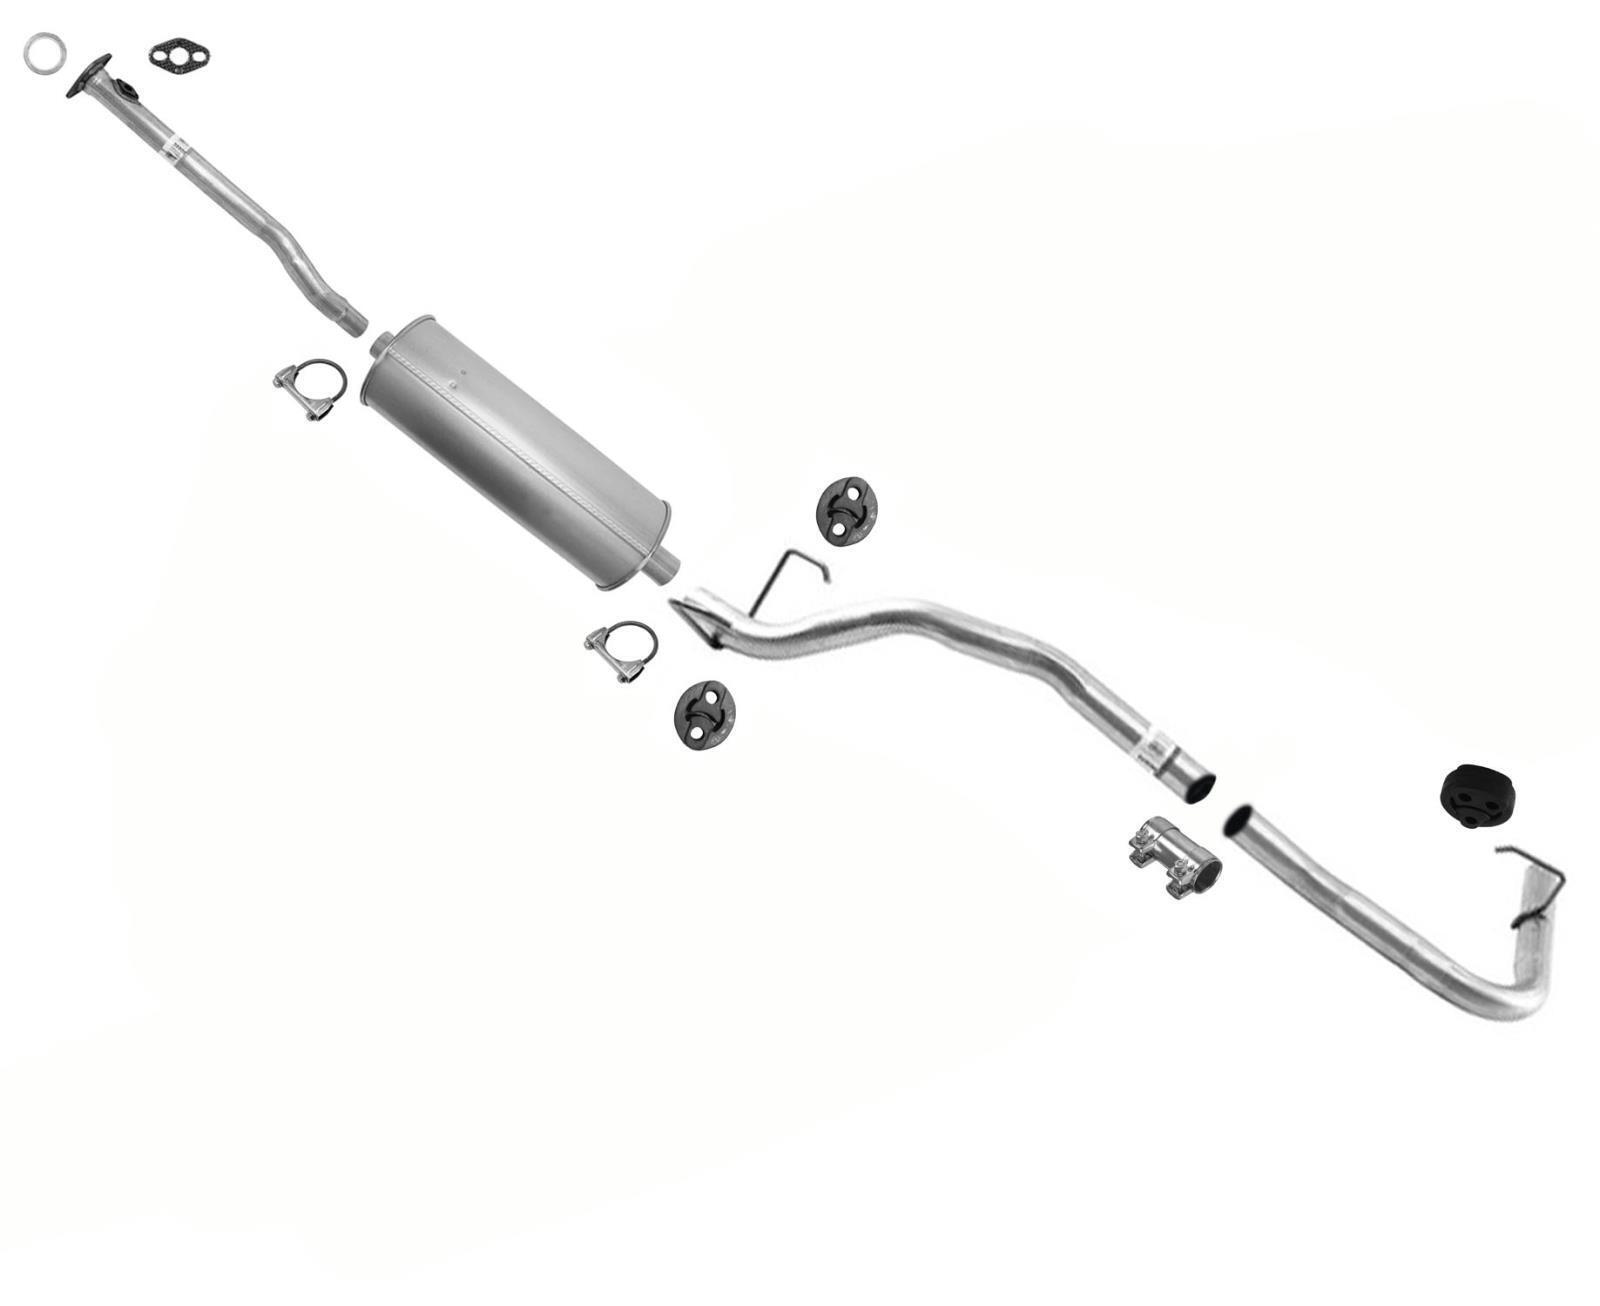 Muffler Exhaust System for Toyota 1999-2004 Tacoma 2.4L with 121.9